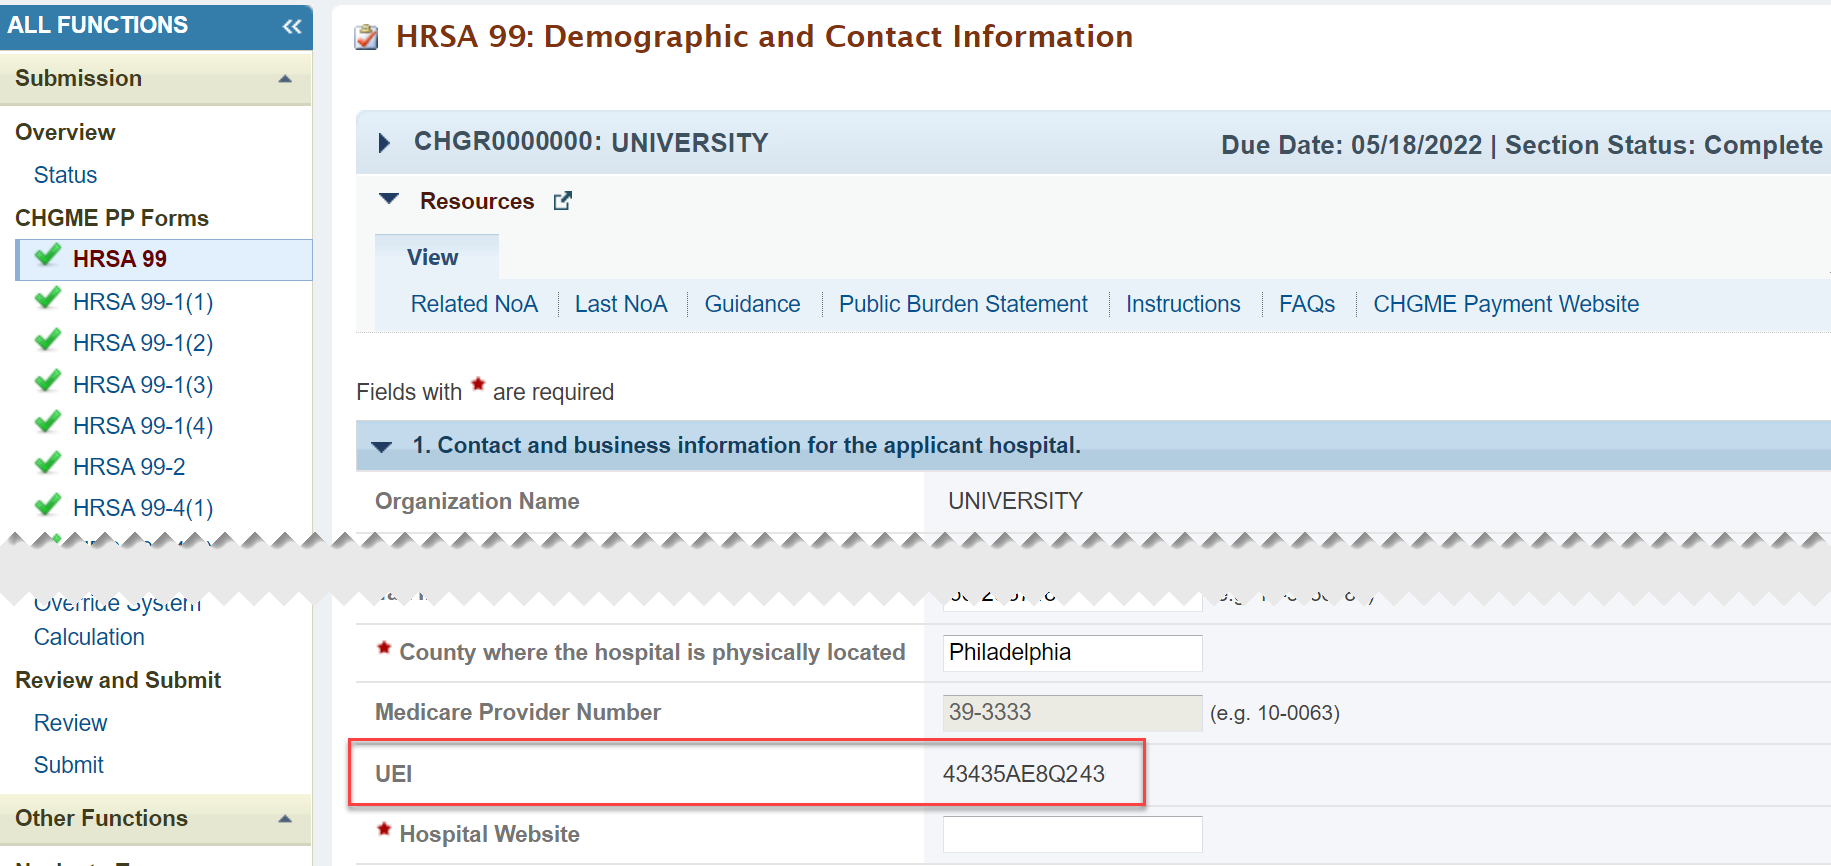 Screenshot of the HRSA 99 Demographic and Contact Information page showing the UEI